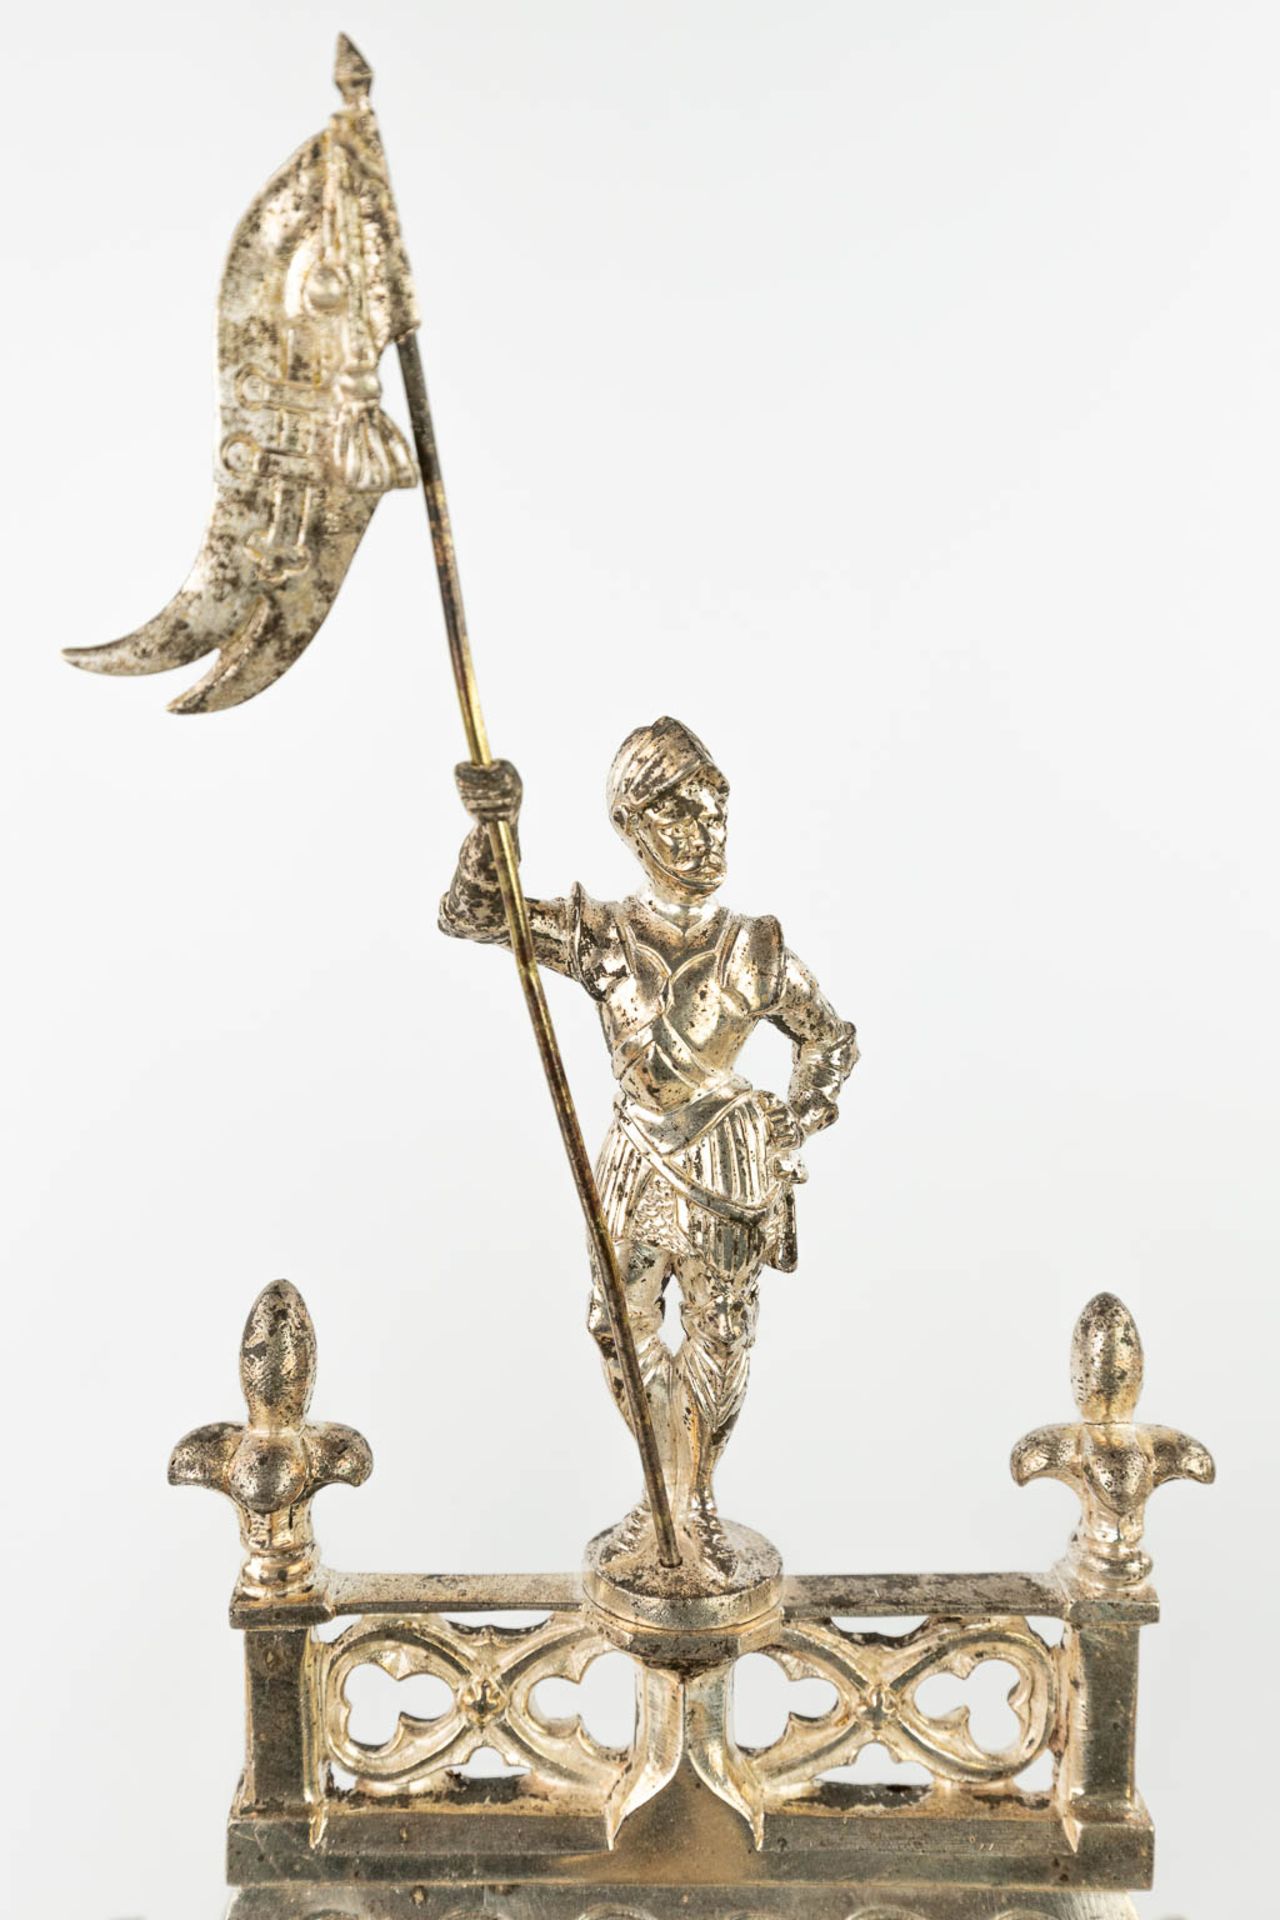 A three-piece garniture clock with candelabra, made of silver-plated bronze in gothic revival style. - Image 3 of 18